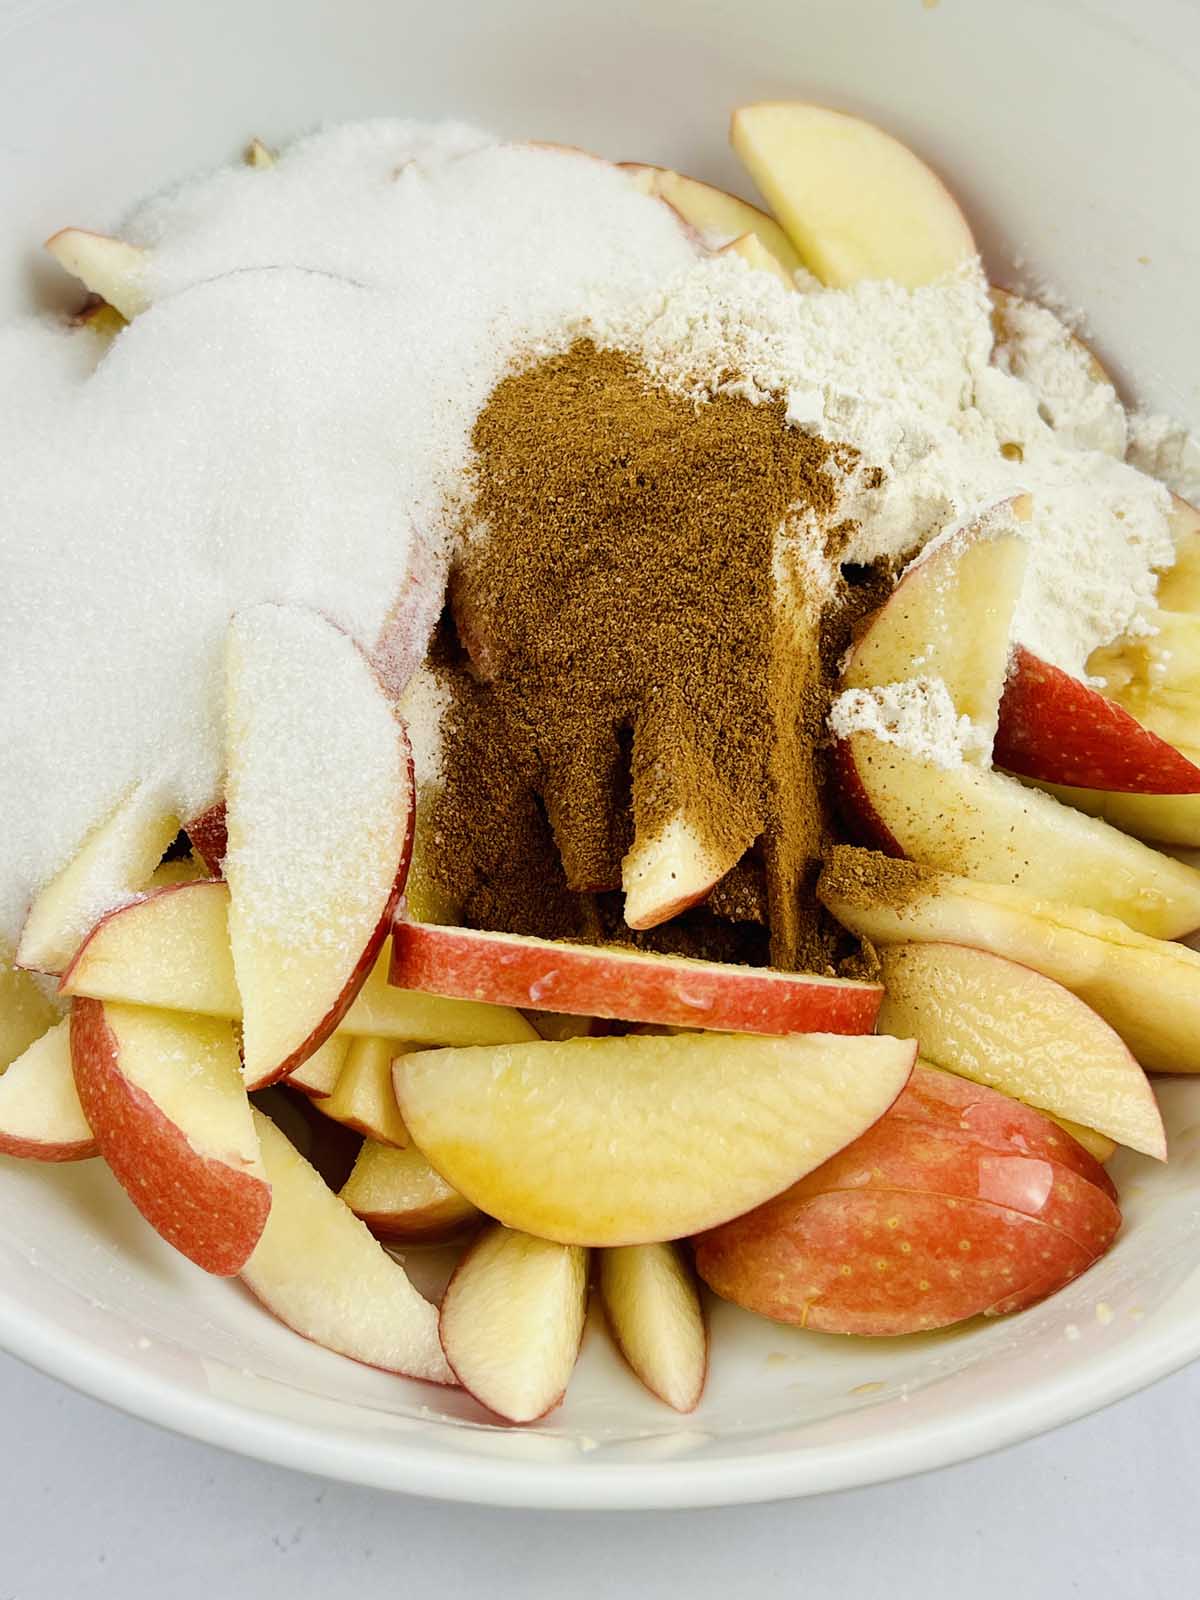 Apples in a bowl topped with filling ingredients.